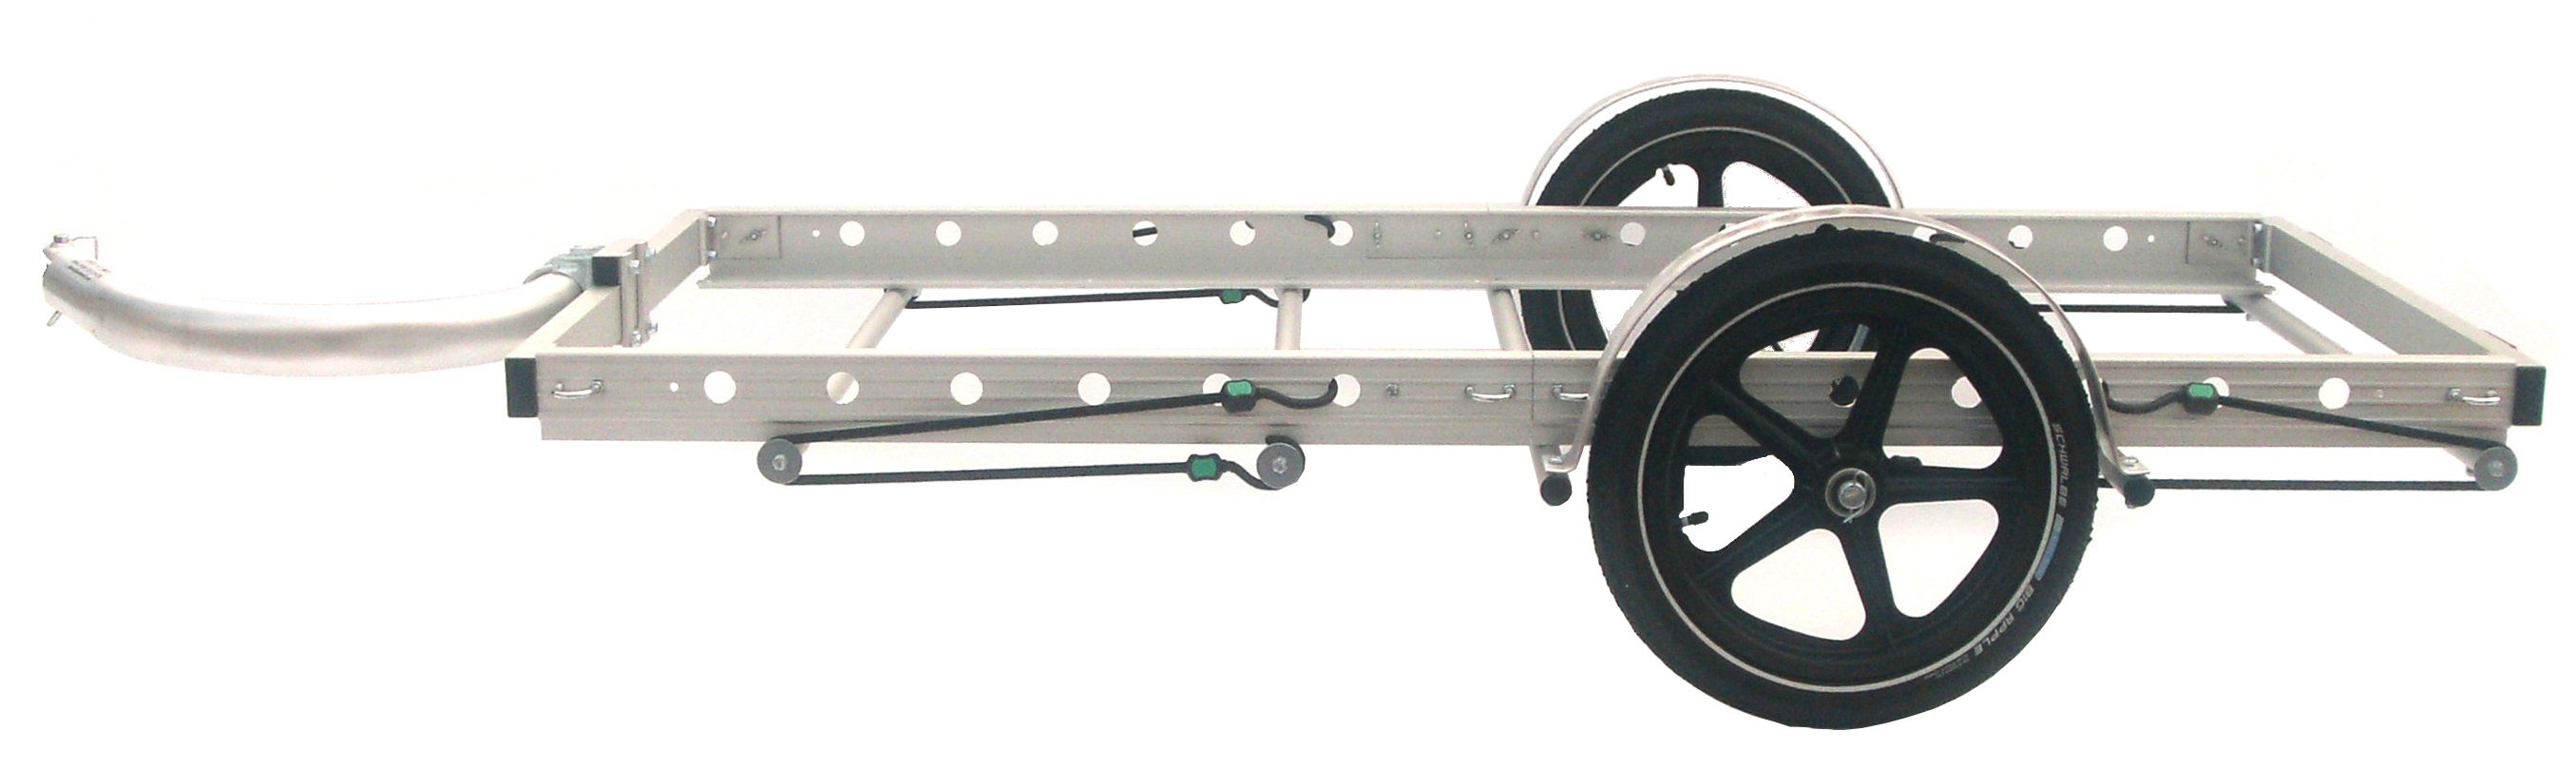 bicycle trailers for adults